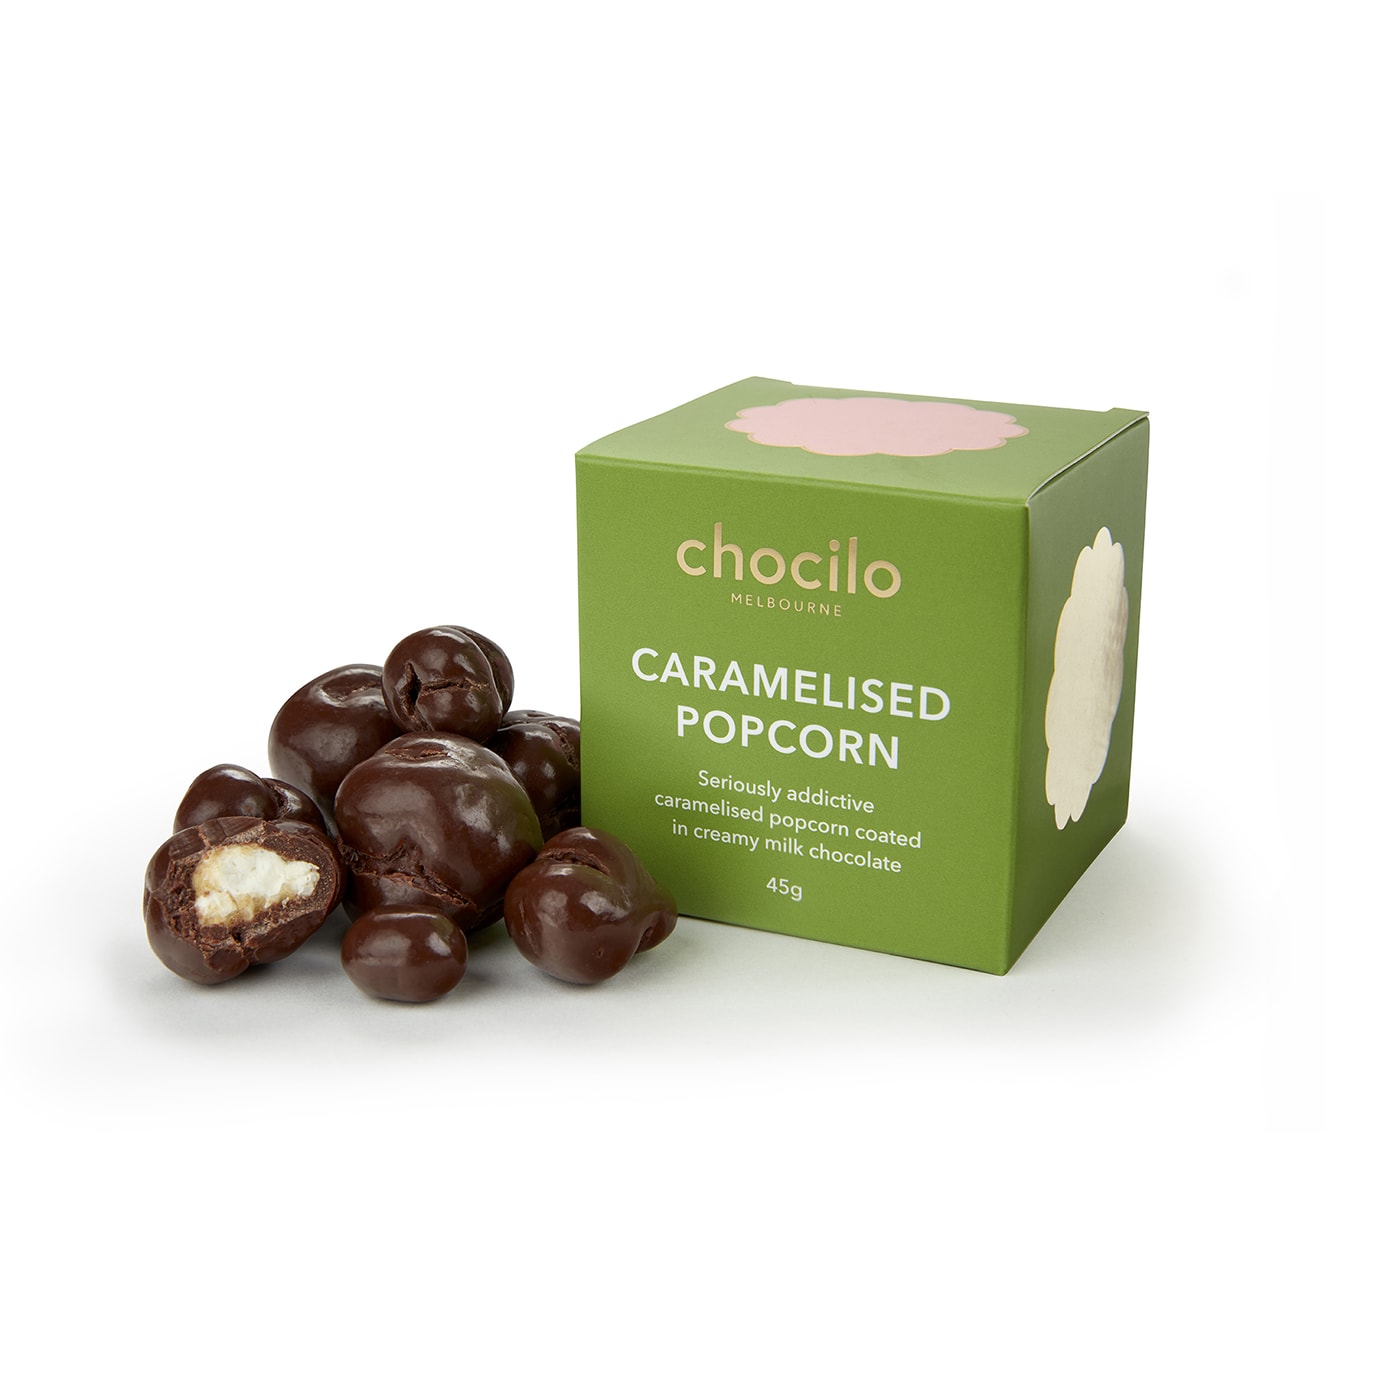 Chocilo Melbourne Caramelised Popcorn in Milk Chocolate Gift Cube